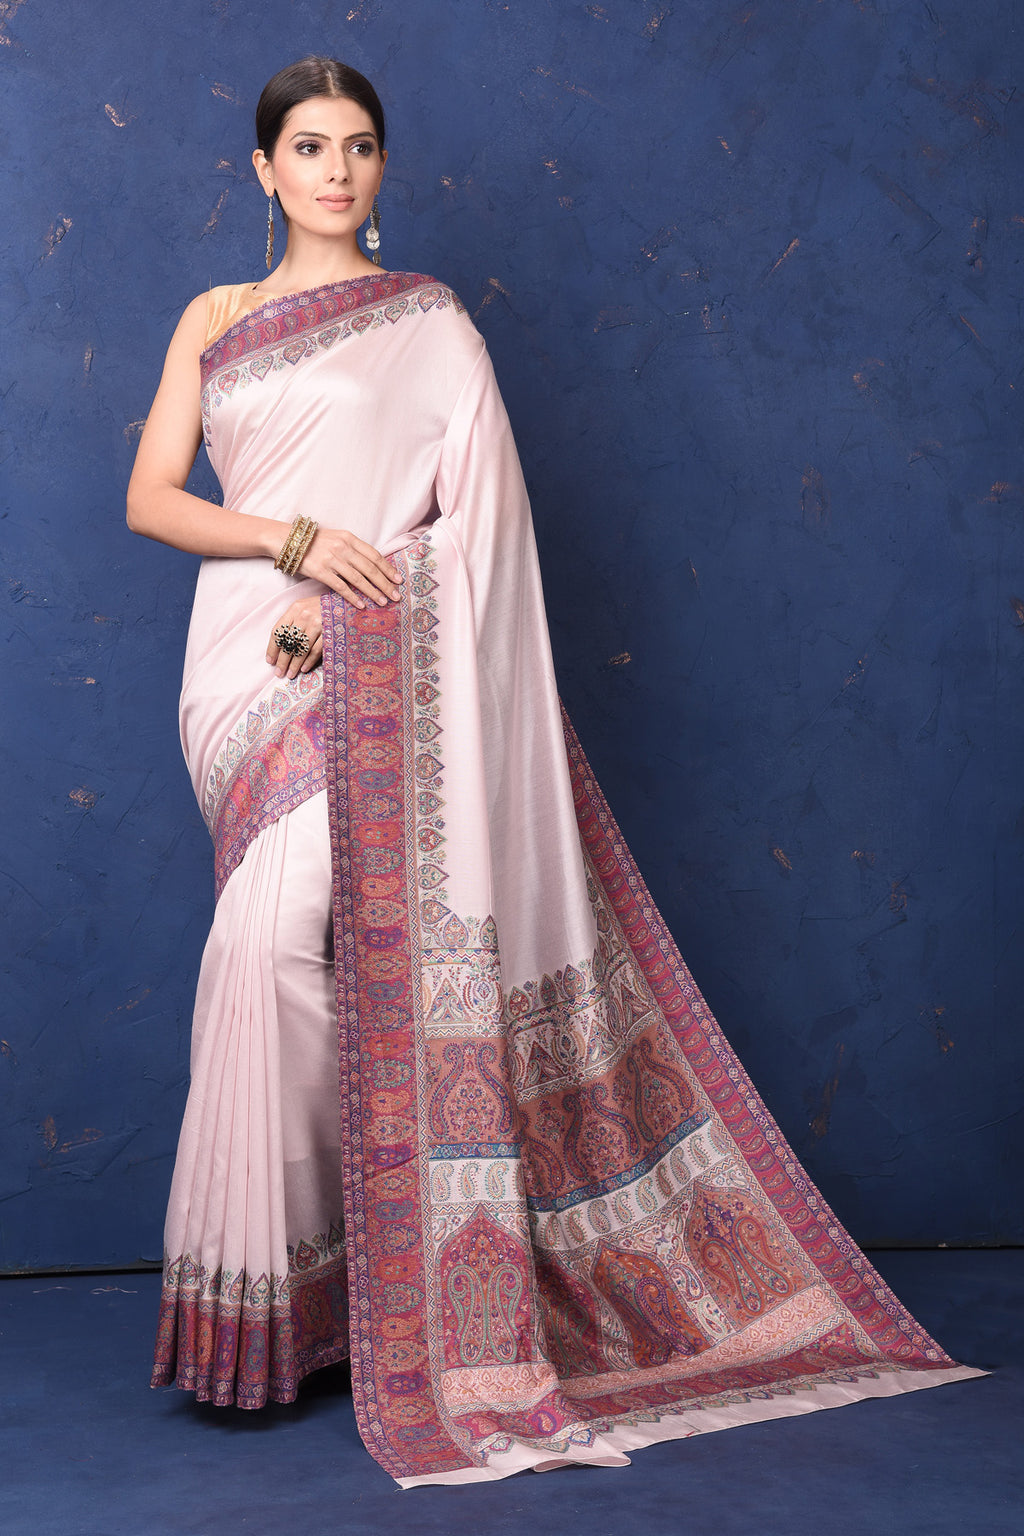 Buy stunning cream tussar muga silk saree online in USA with Kani border. Buy latest designer sarees, handloom saris, embroidered sarees, Bollywood sarees, fancy sarees for special occasions from Pure Elegance Indian fashion store in USA. Shop soft silk sarees, pure Banarasi sarees, cotton sarees, georgette sarees. -full view